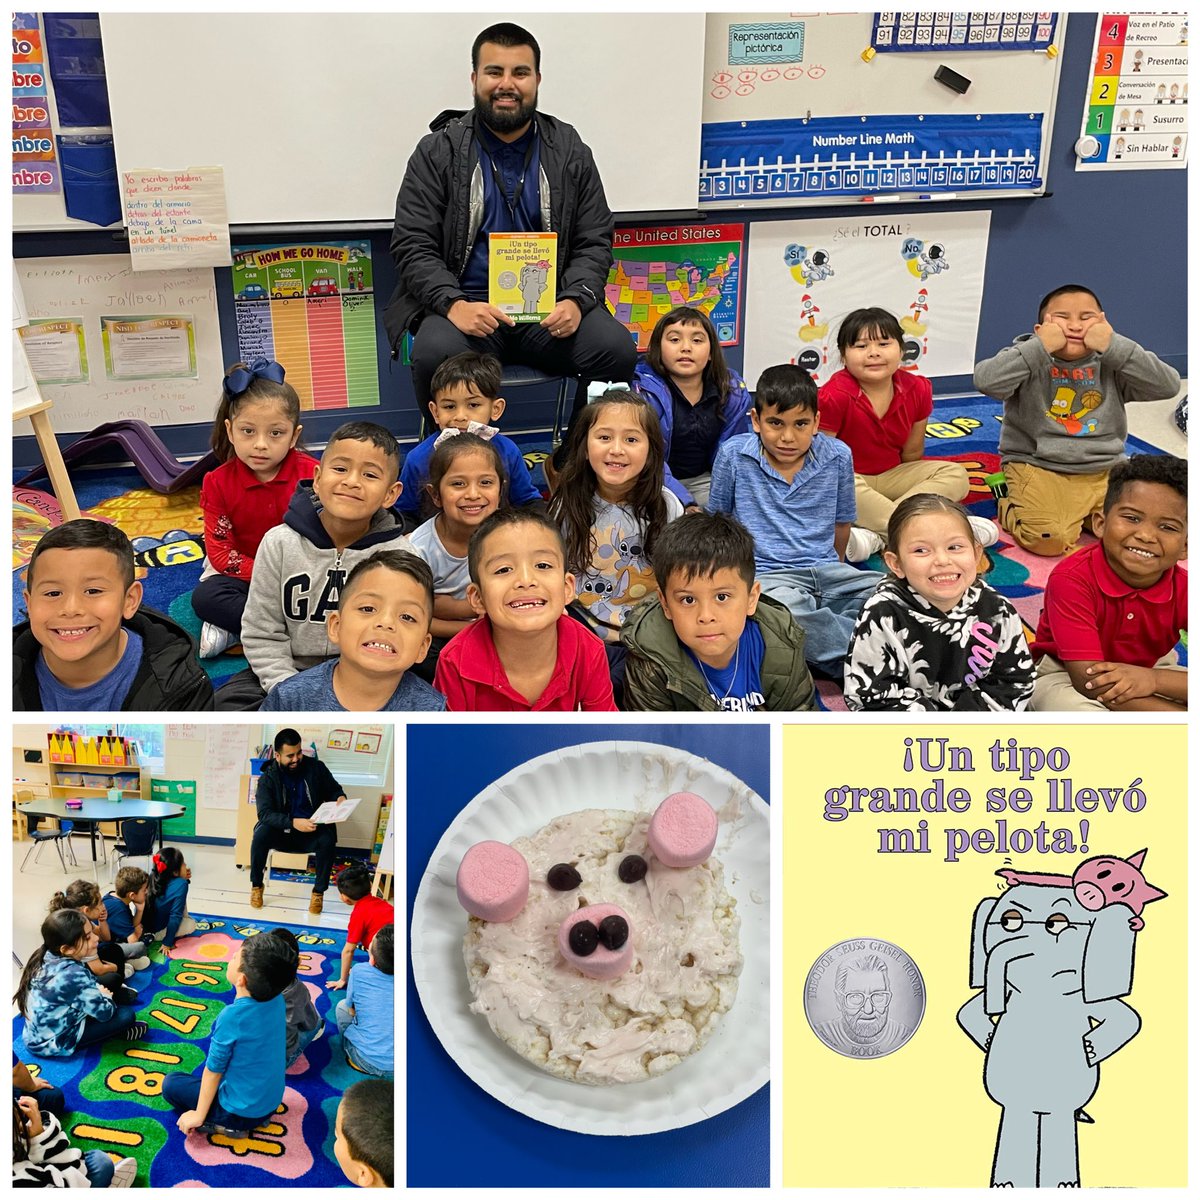 Thank you to our CIS site coordinator, Mr. Castillo for being our celebrity reader today and helping @mrsDS84 and me wrap up #WOYC23 with a treat❣️🐷 @NISDGlenn @CISSanAntonio @michelleRfine @danielperezLST @ReadwRichardson @mcarrillo_2  @NisdBILESL @nisdelemelar @laurabass714